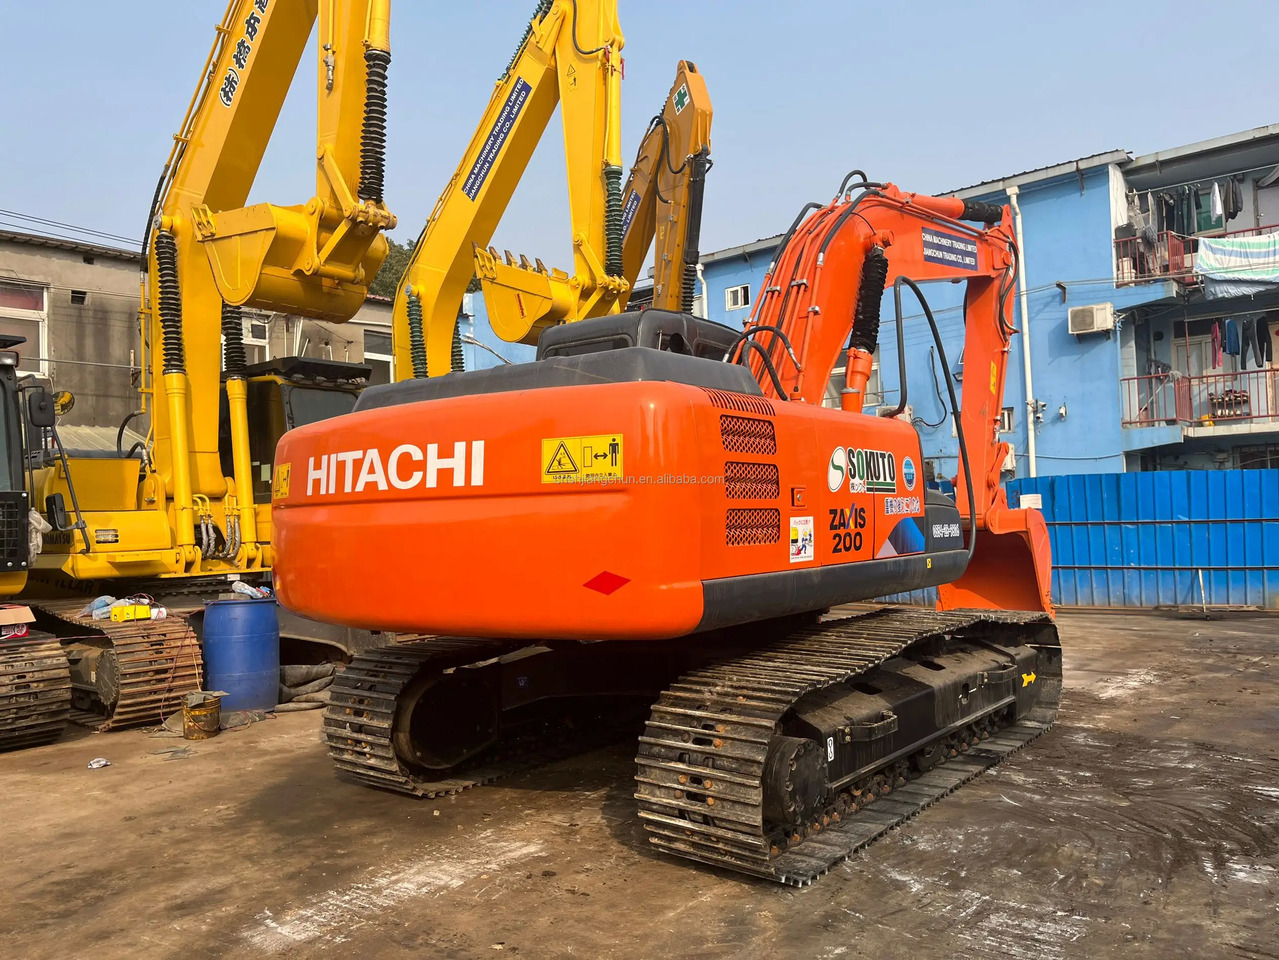 Crawler excavator Original Well-Maintained Hitachi ZX200-3 Used Excavator for Sale,Second hand hitachi zx200-3 zx200-3G excavator: picture 7